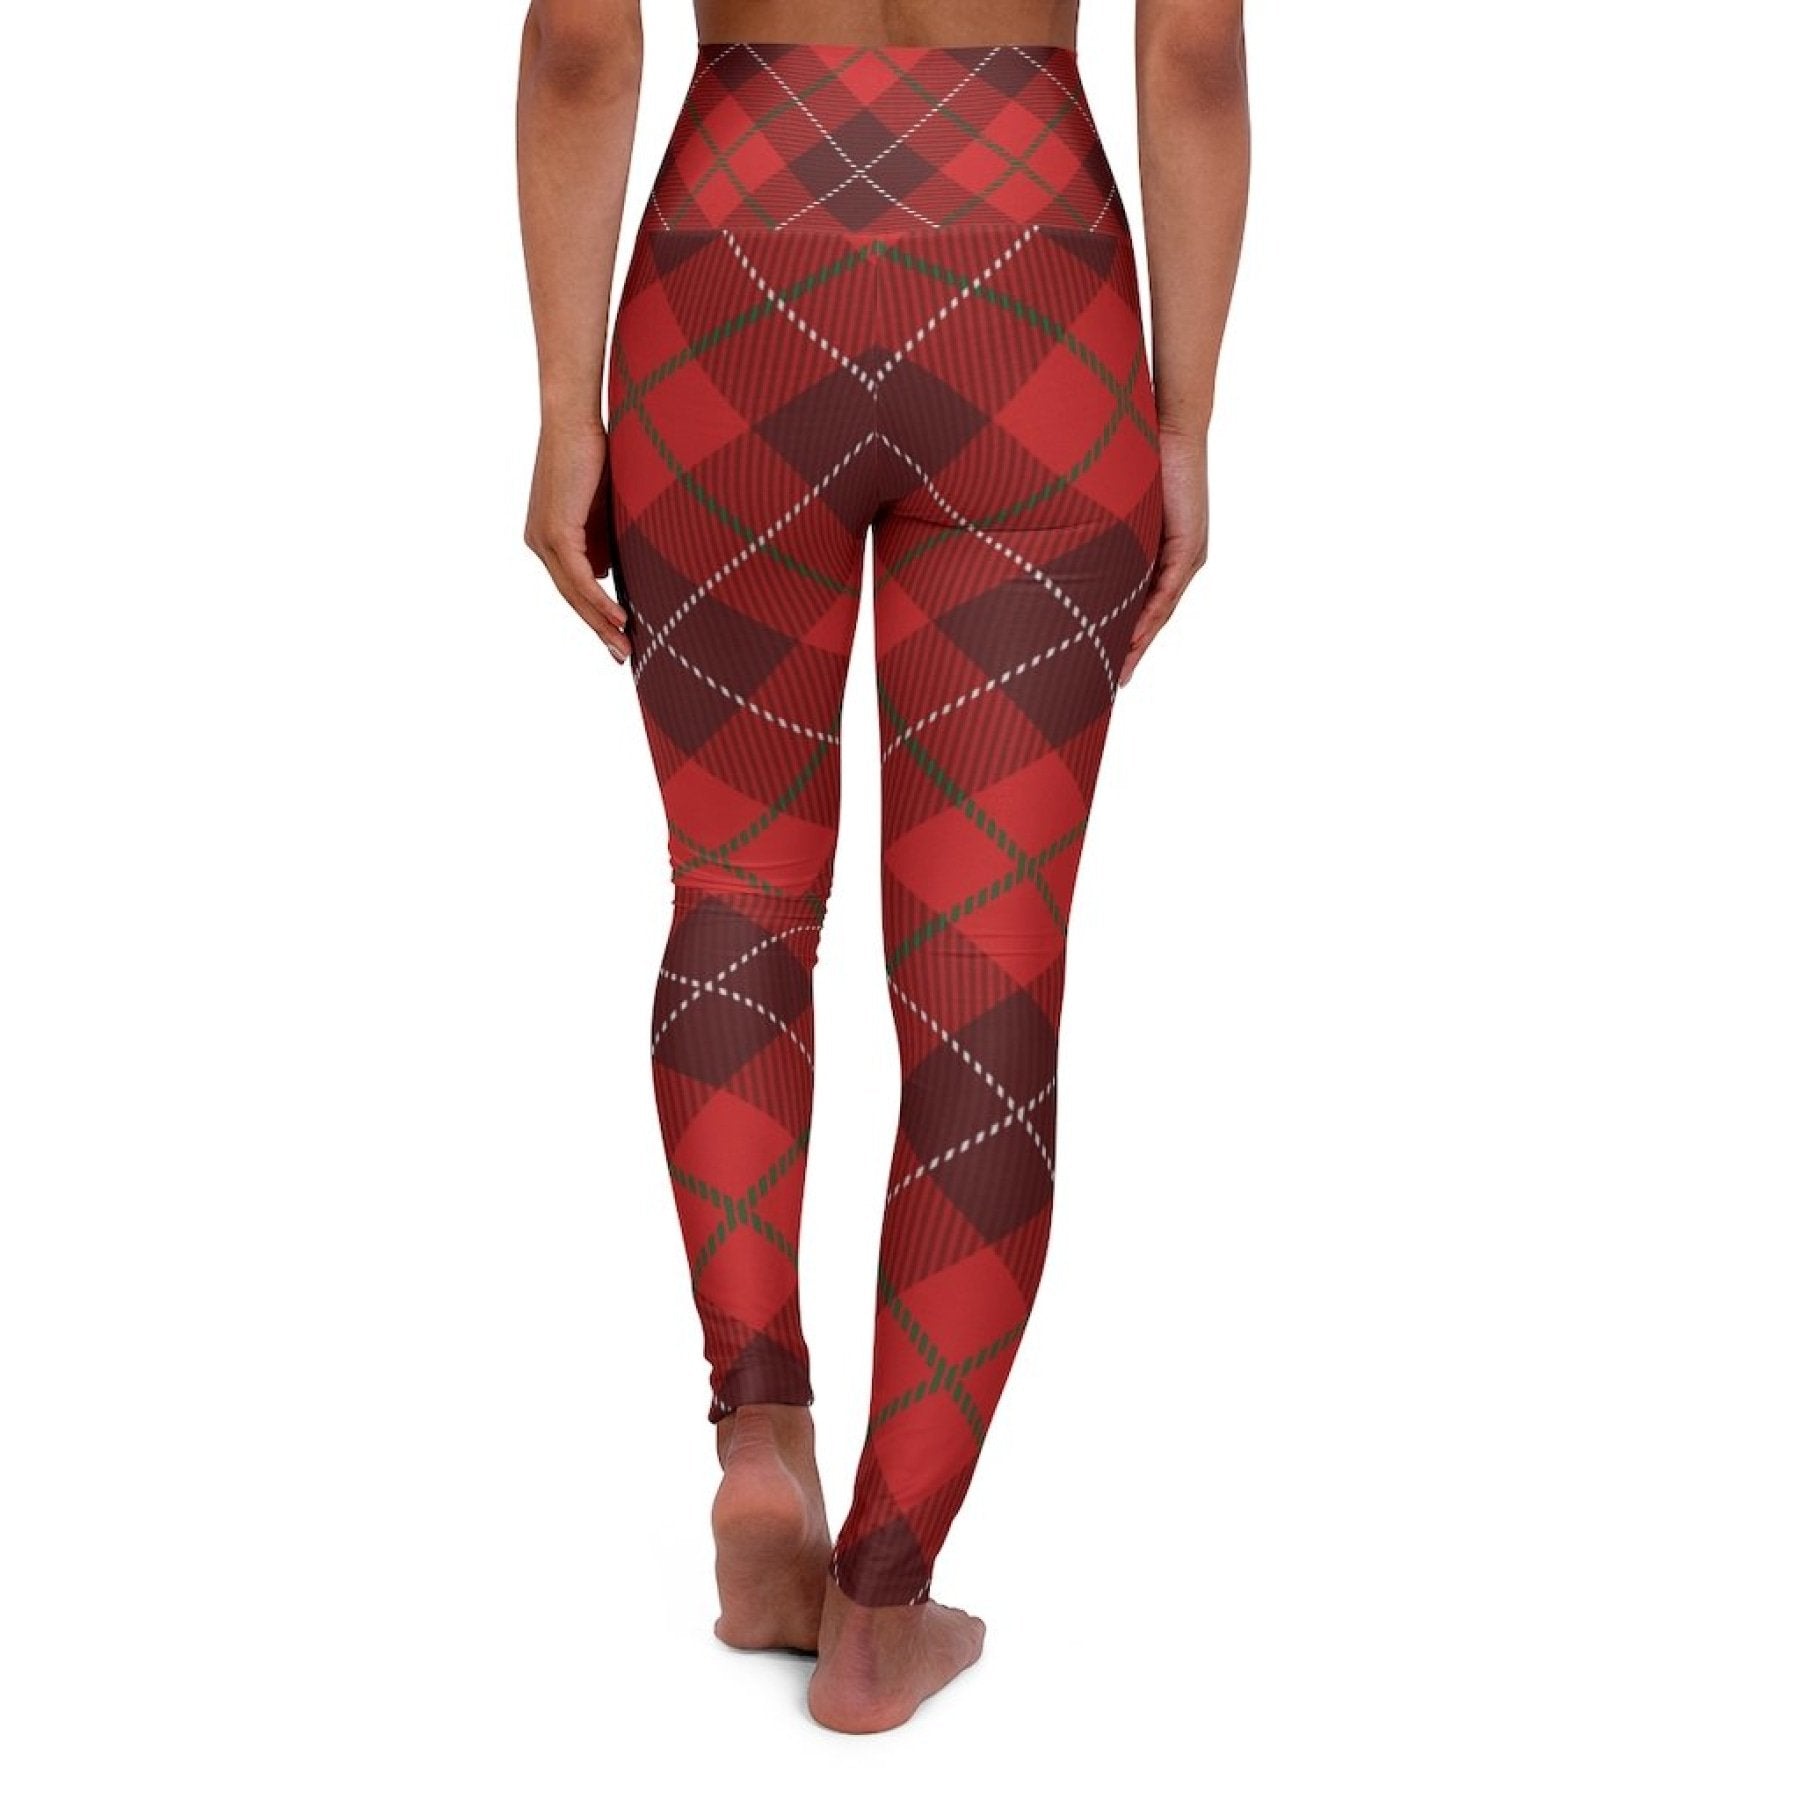 Womens Leggings, Red Plaid Style High Waisted Fitness Pants - Walbiz.com